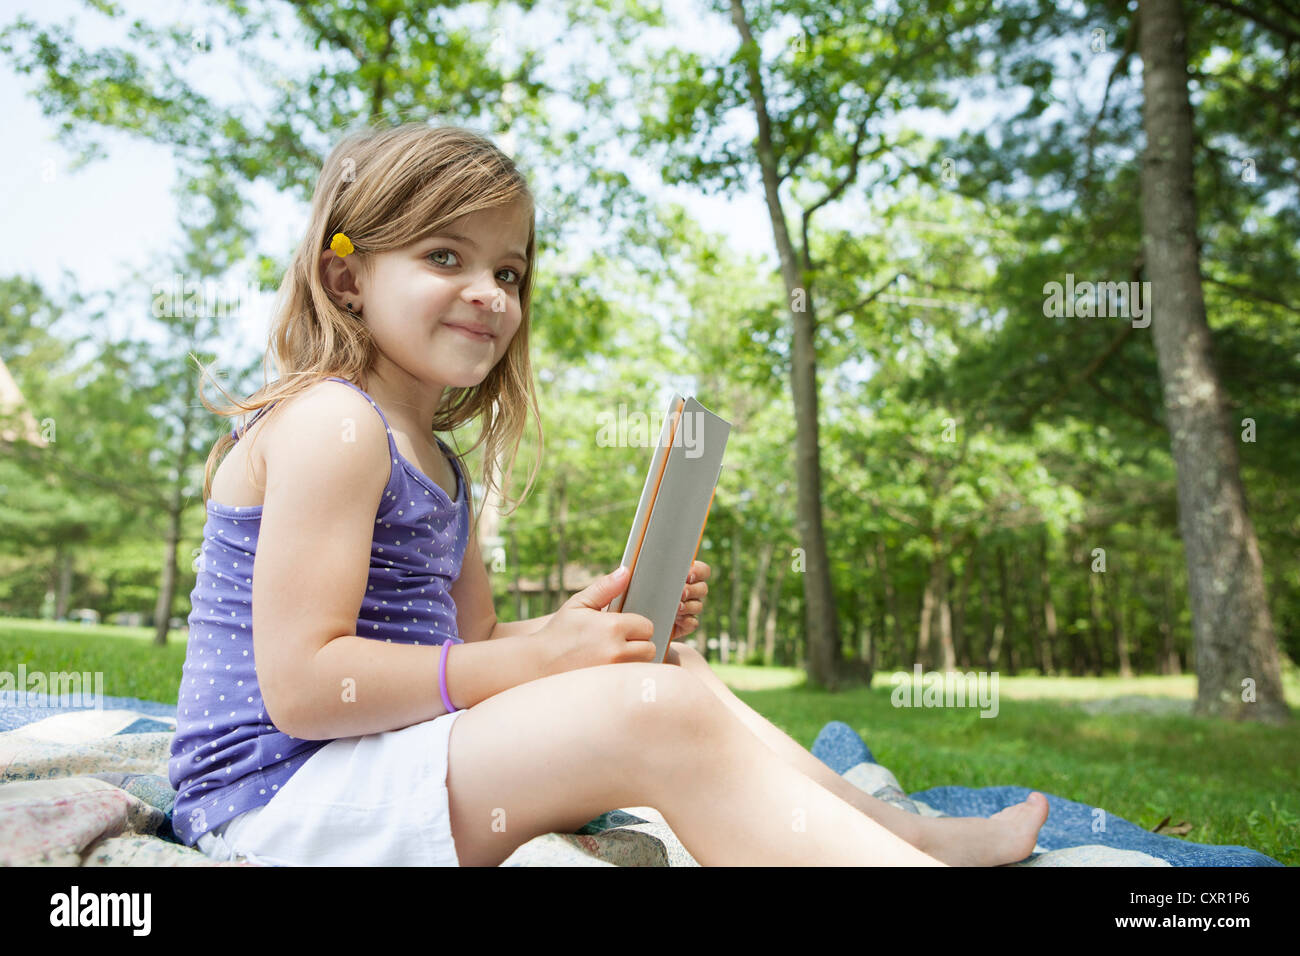 Girl sitting on picnic blanket with digital tablet Stock Photo